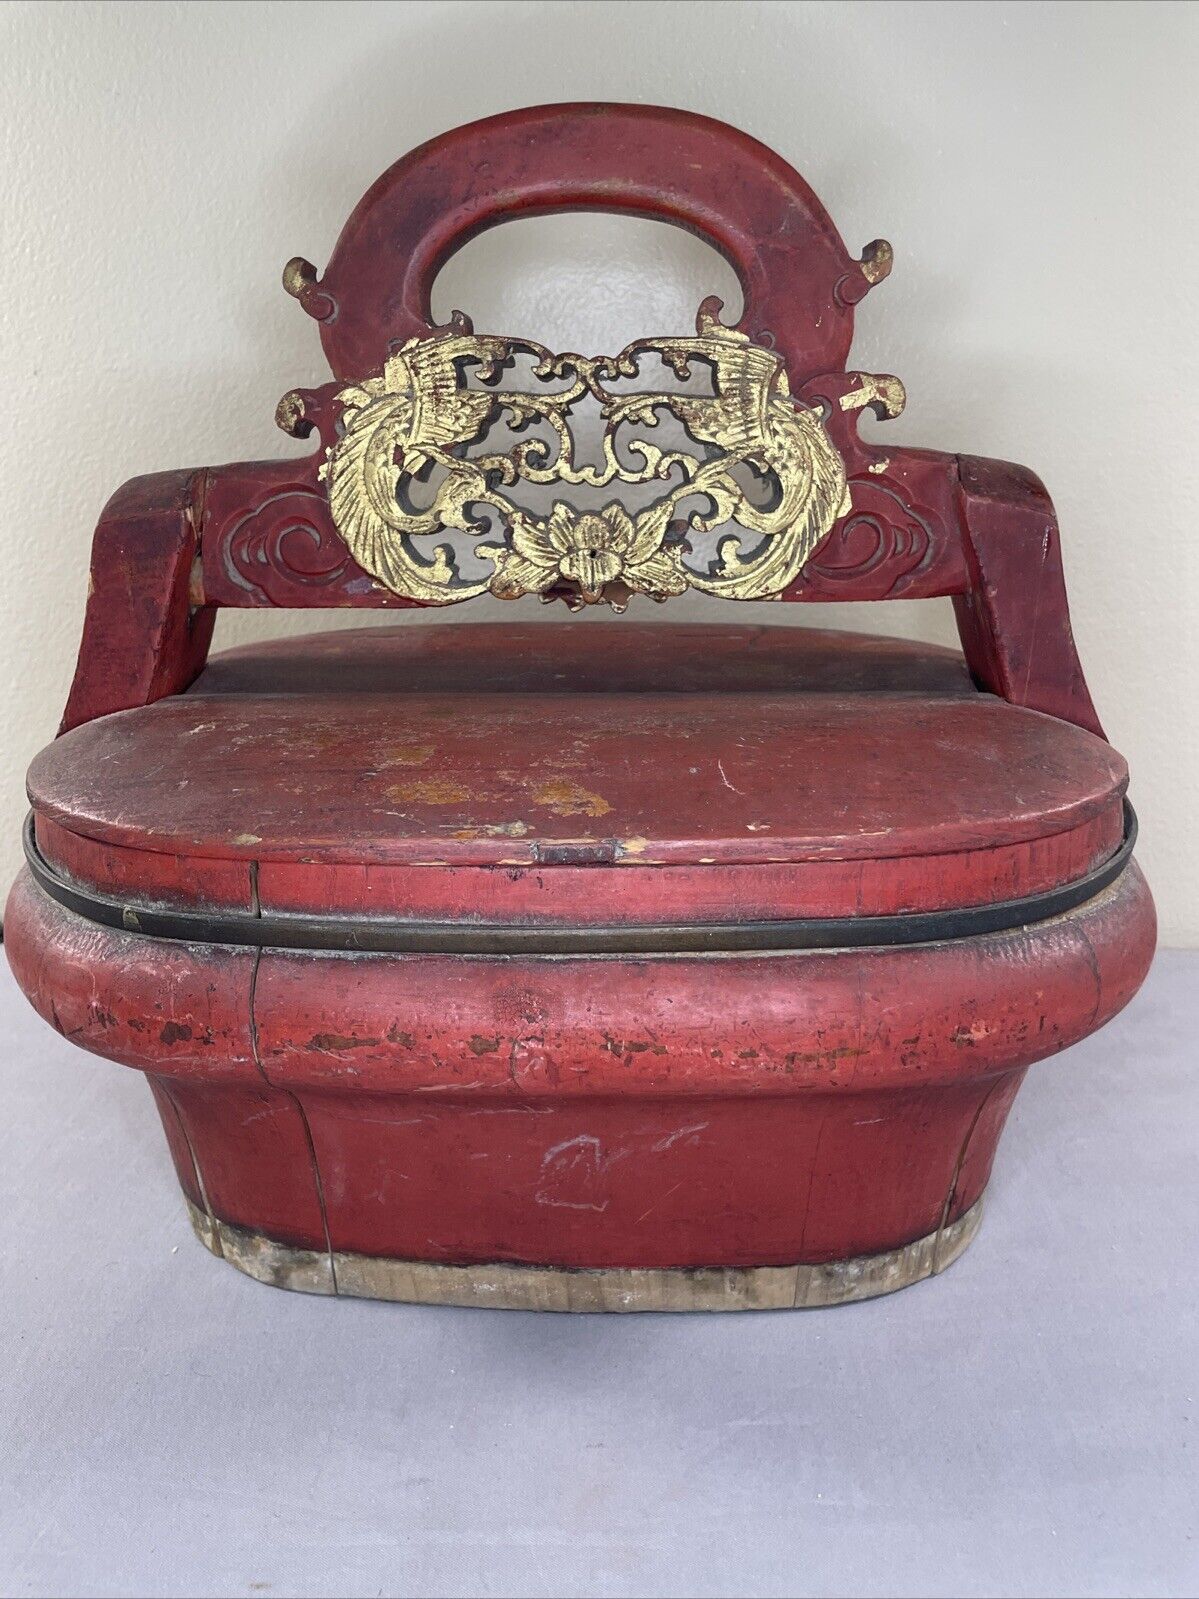 Vintage Chinese Carved Food/Lunch Box Brass Trim